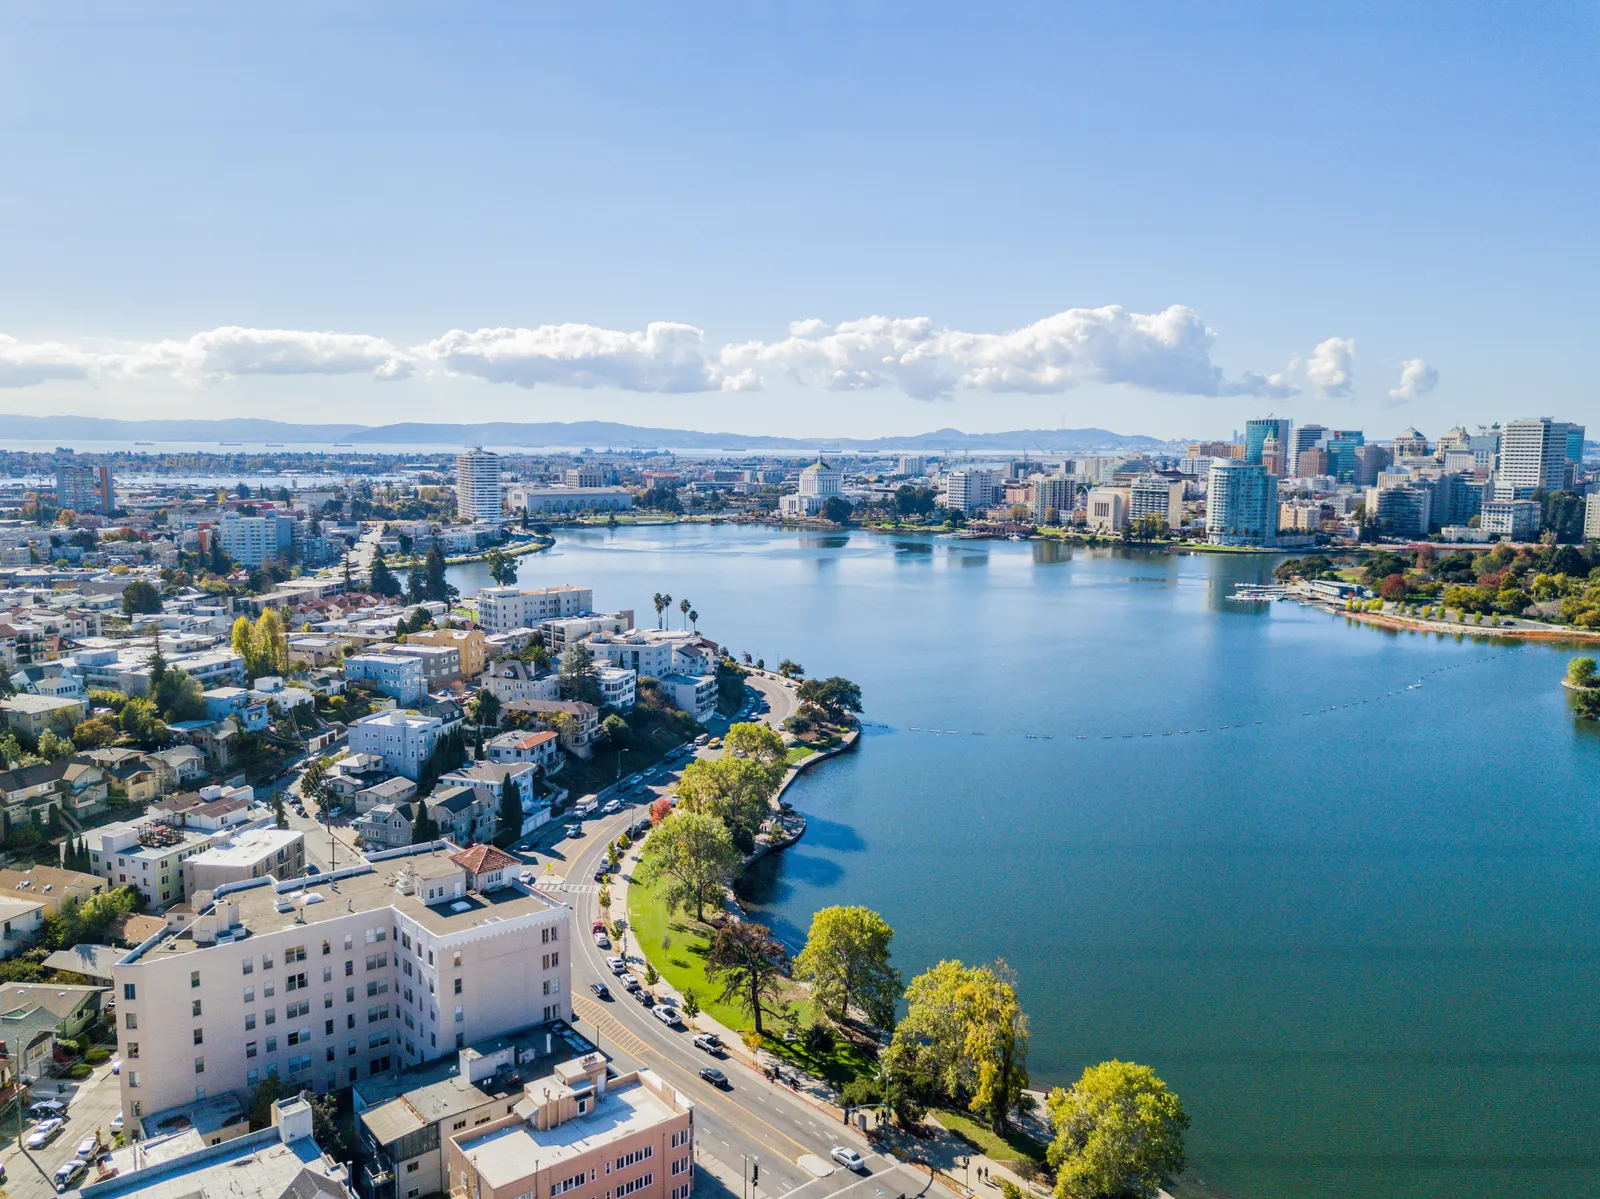 Oakland, California Most Expensive City of united states